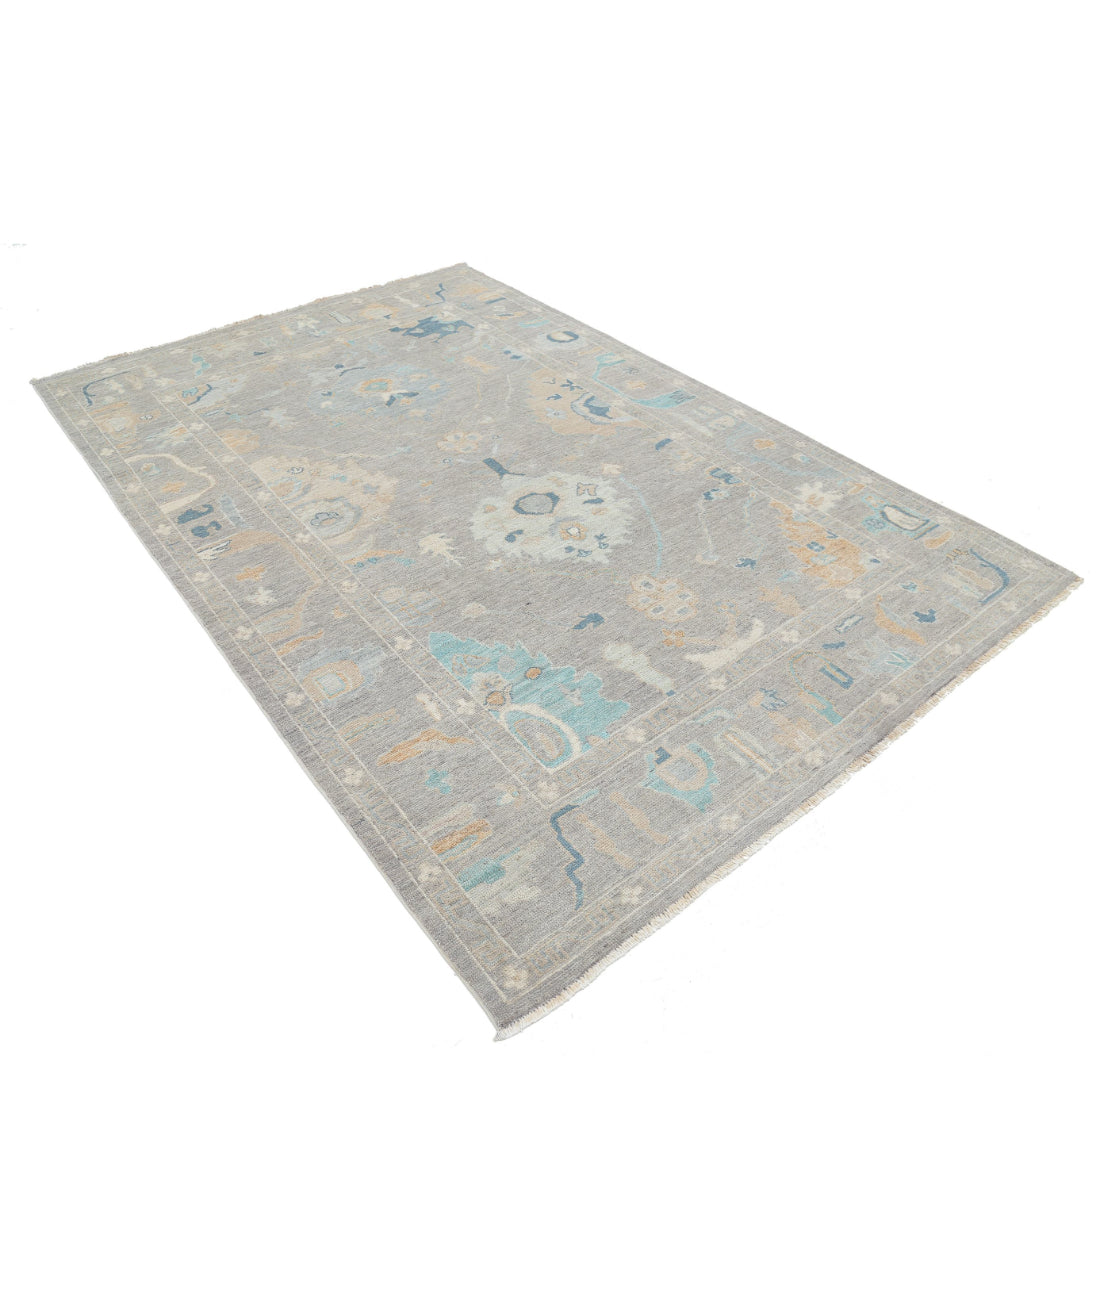 Hand Knotted Oushak Wool Rug - 5'11'' x 8'1'' 5'11'' x 8'1'' (178 X 243) / Brown / Grey